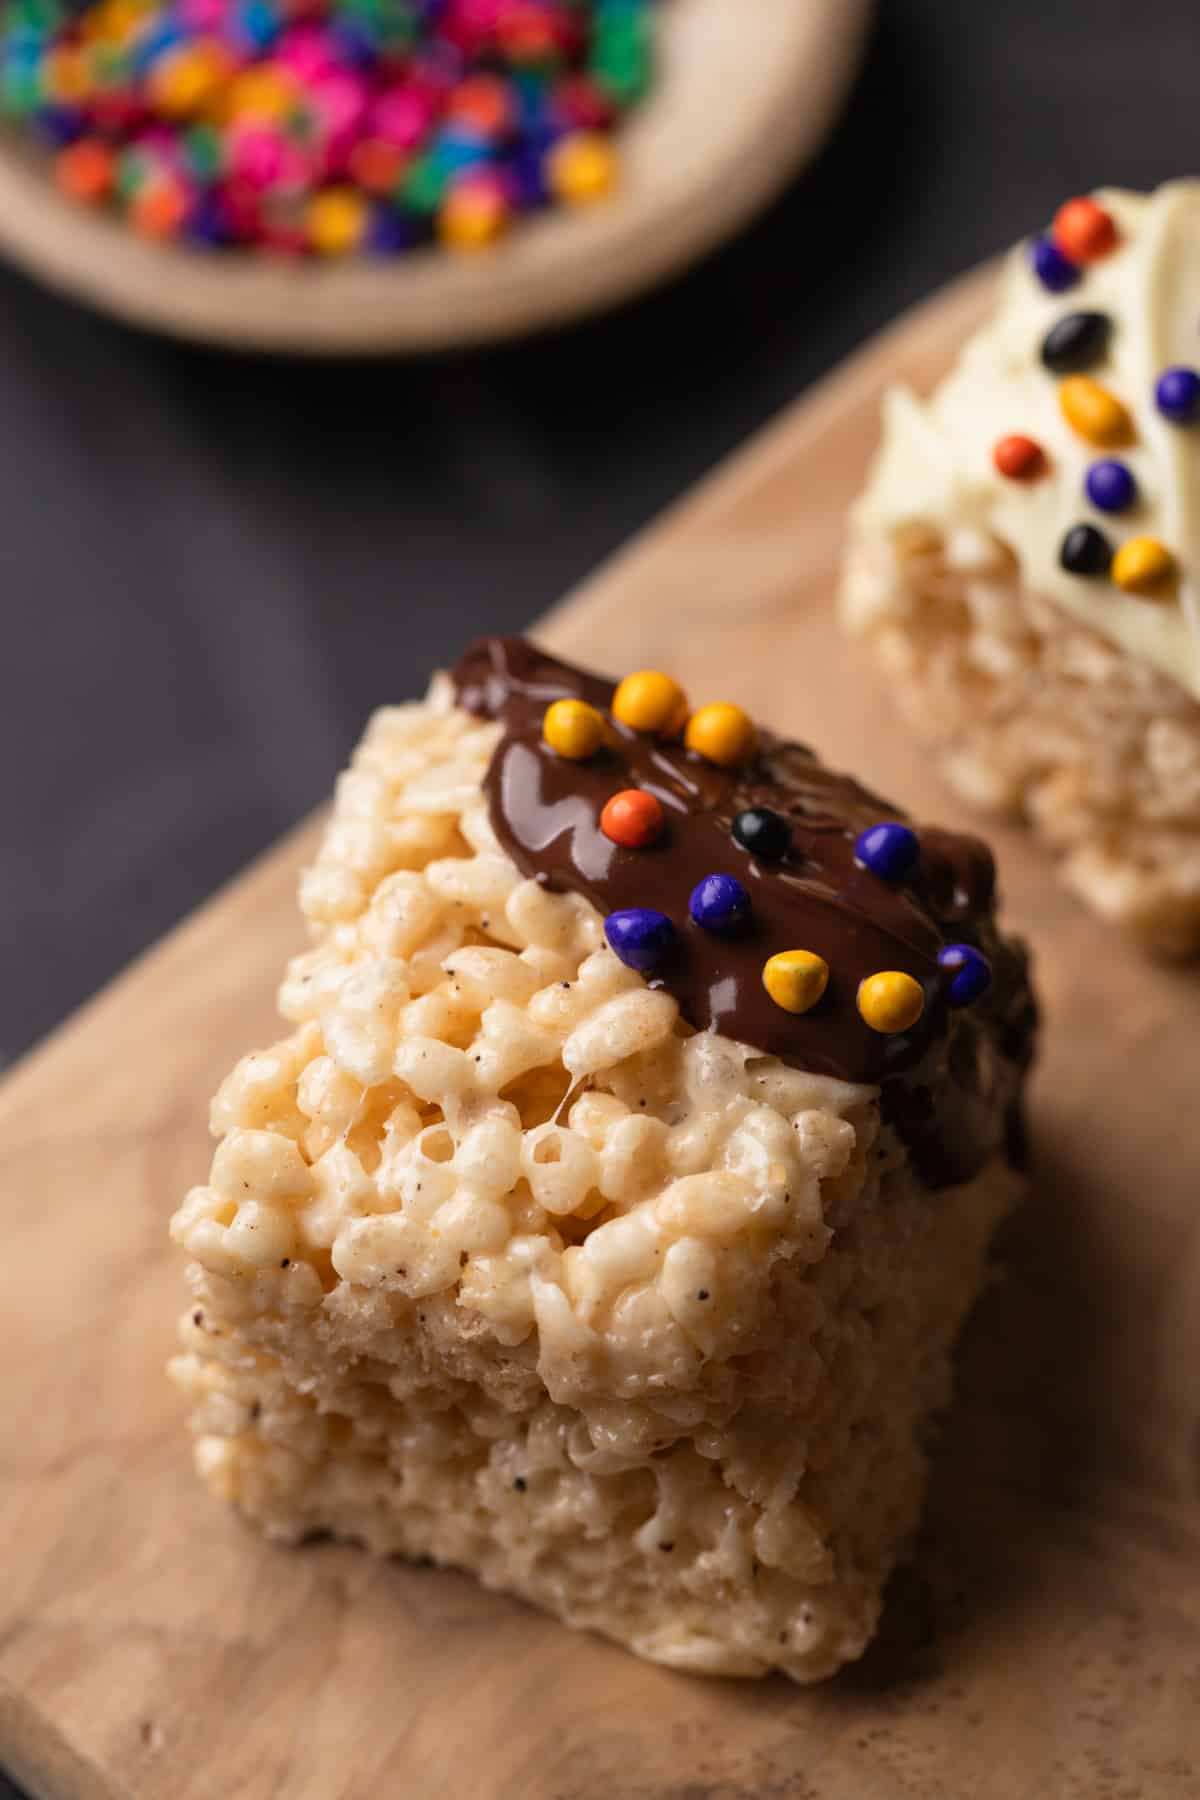 Close up of a Rice Krispie treat with chocolate and sprinkles.